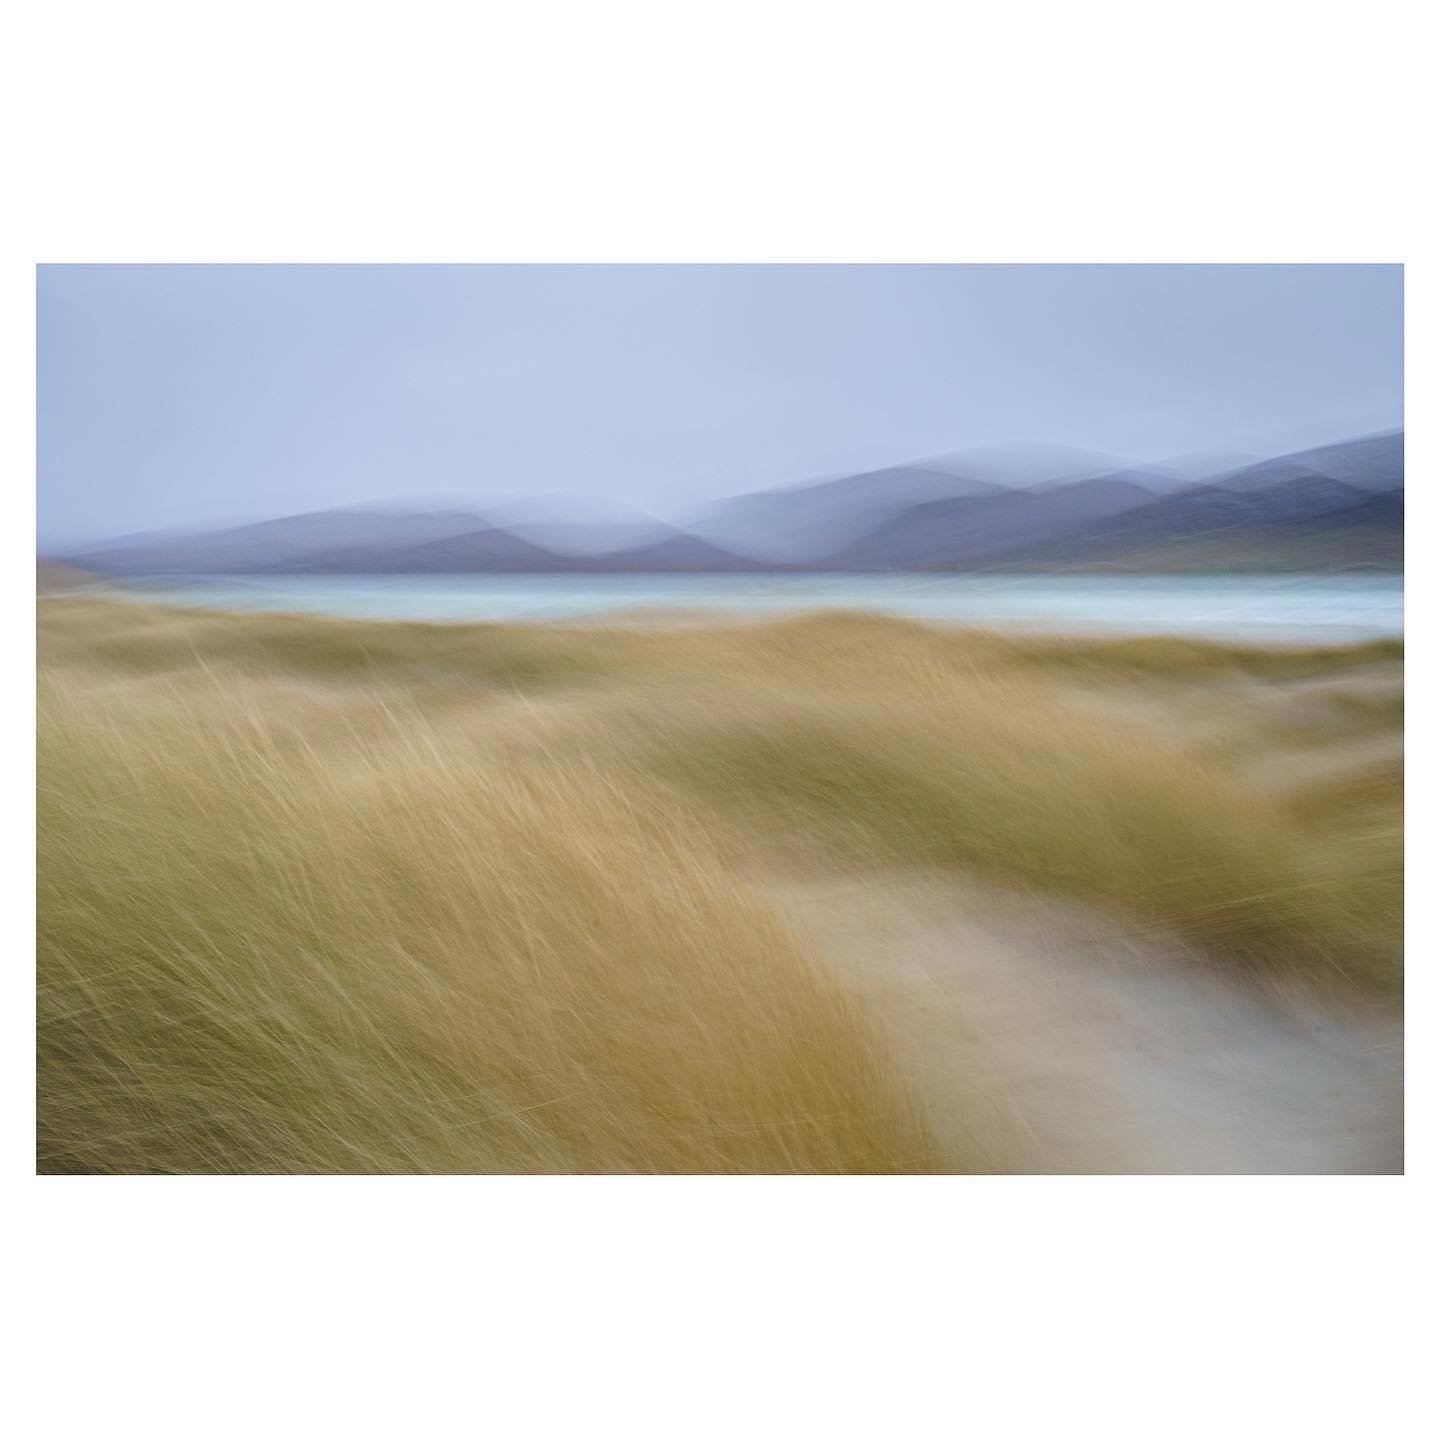 One from a wonderful trip to the Isle of Harris a couple of years ago. 
.
.
.
.
.

#dunes #seascape #seascapephotography #icm #icmphotography #icmphotomag #coloursofnature #coastal #outdoorphotographymagazine #isleofharris #fineartphotography #elemen